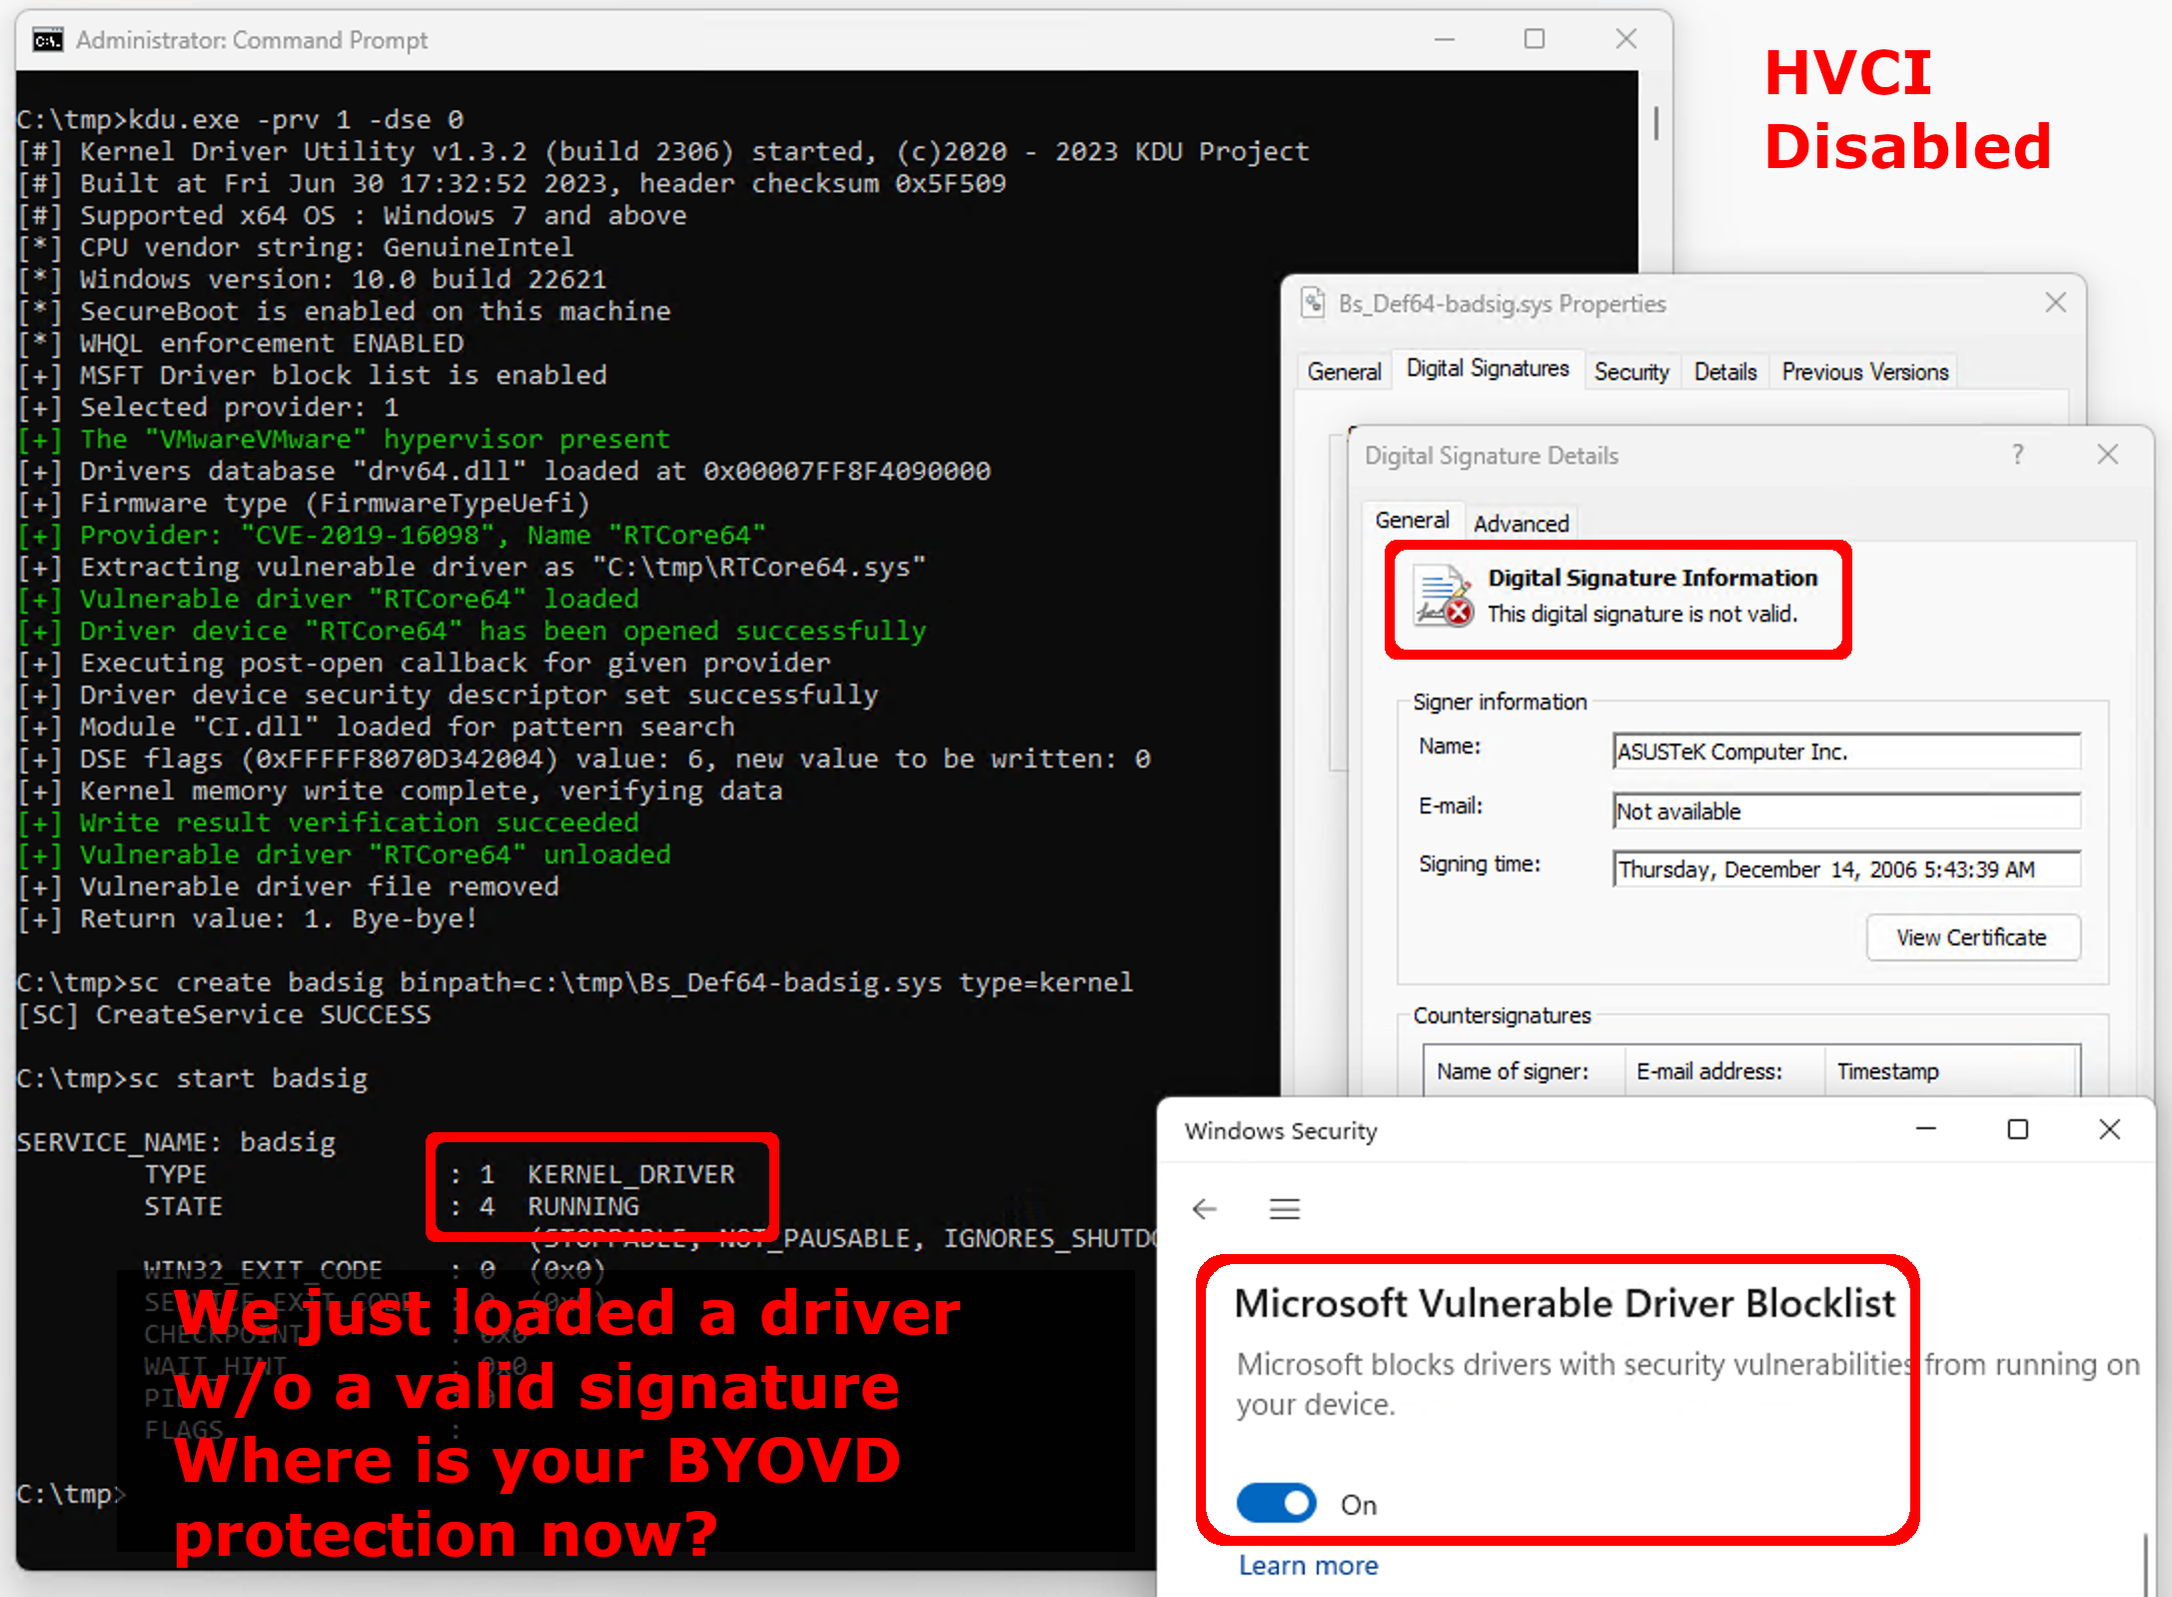 Screenshot of a driver without a valid signature being loaded, yet "Microsoft Vulnerable Driver Blocklist" is enabled